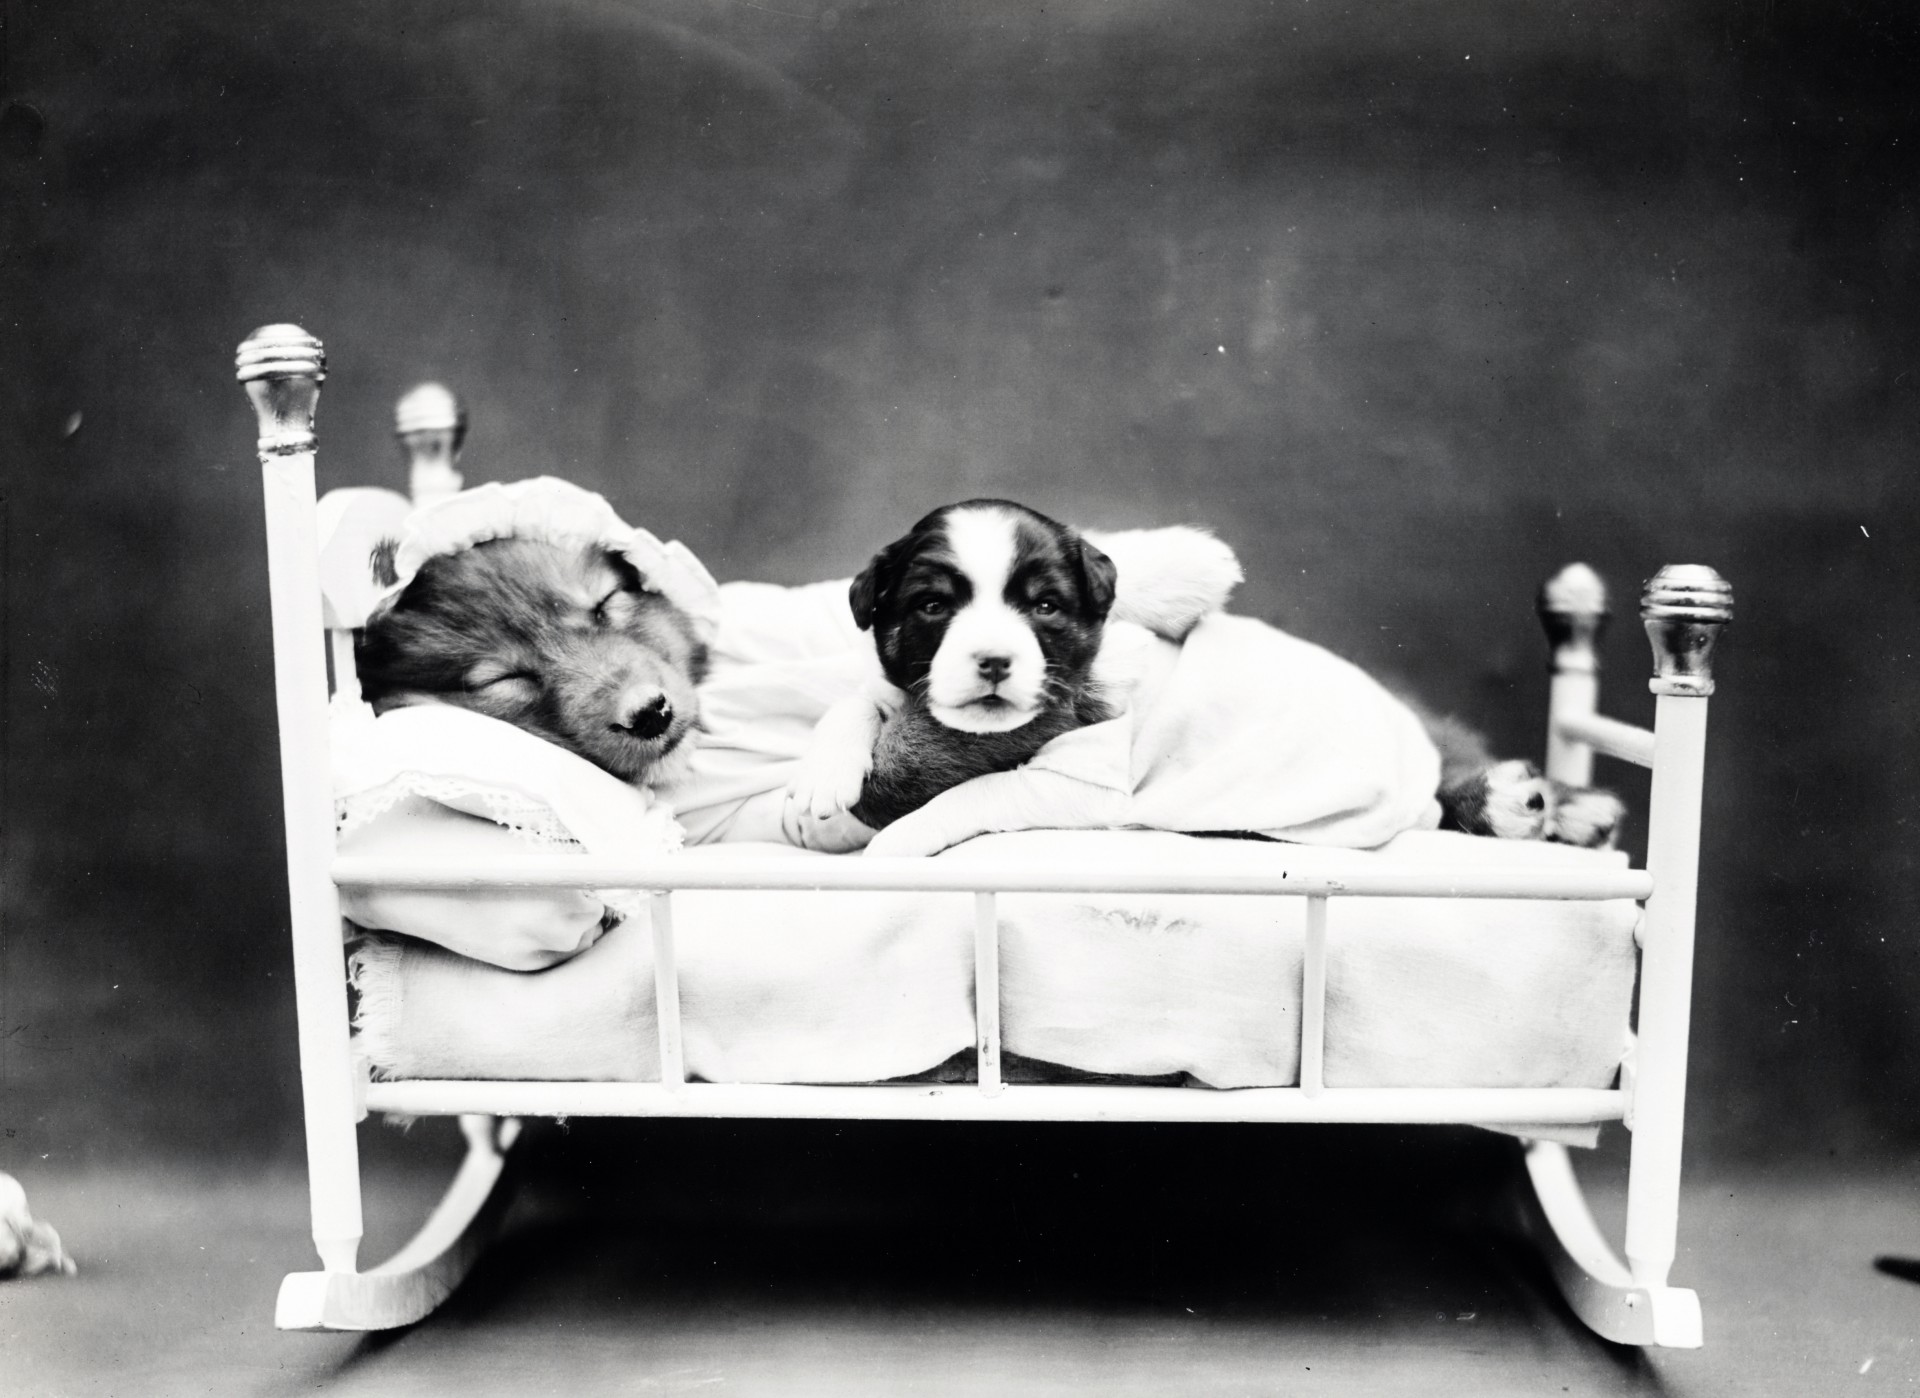 Public domain 1900s vintage photo of two puppy dogs in miniature human bed